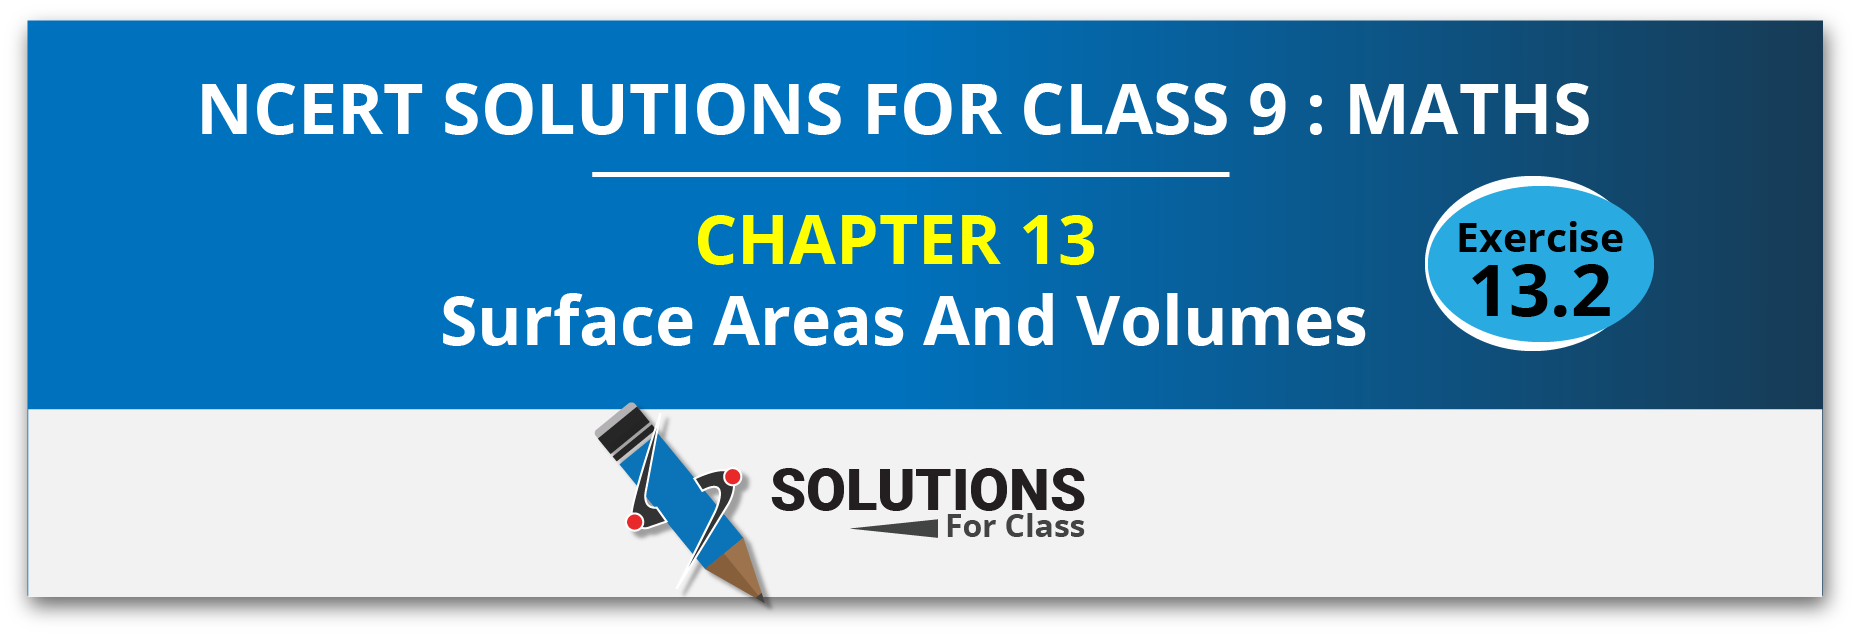 NCERT Solution For Class 9, Maths, Chapter 13, Surface Areas And Volumes, Exercise 13.2